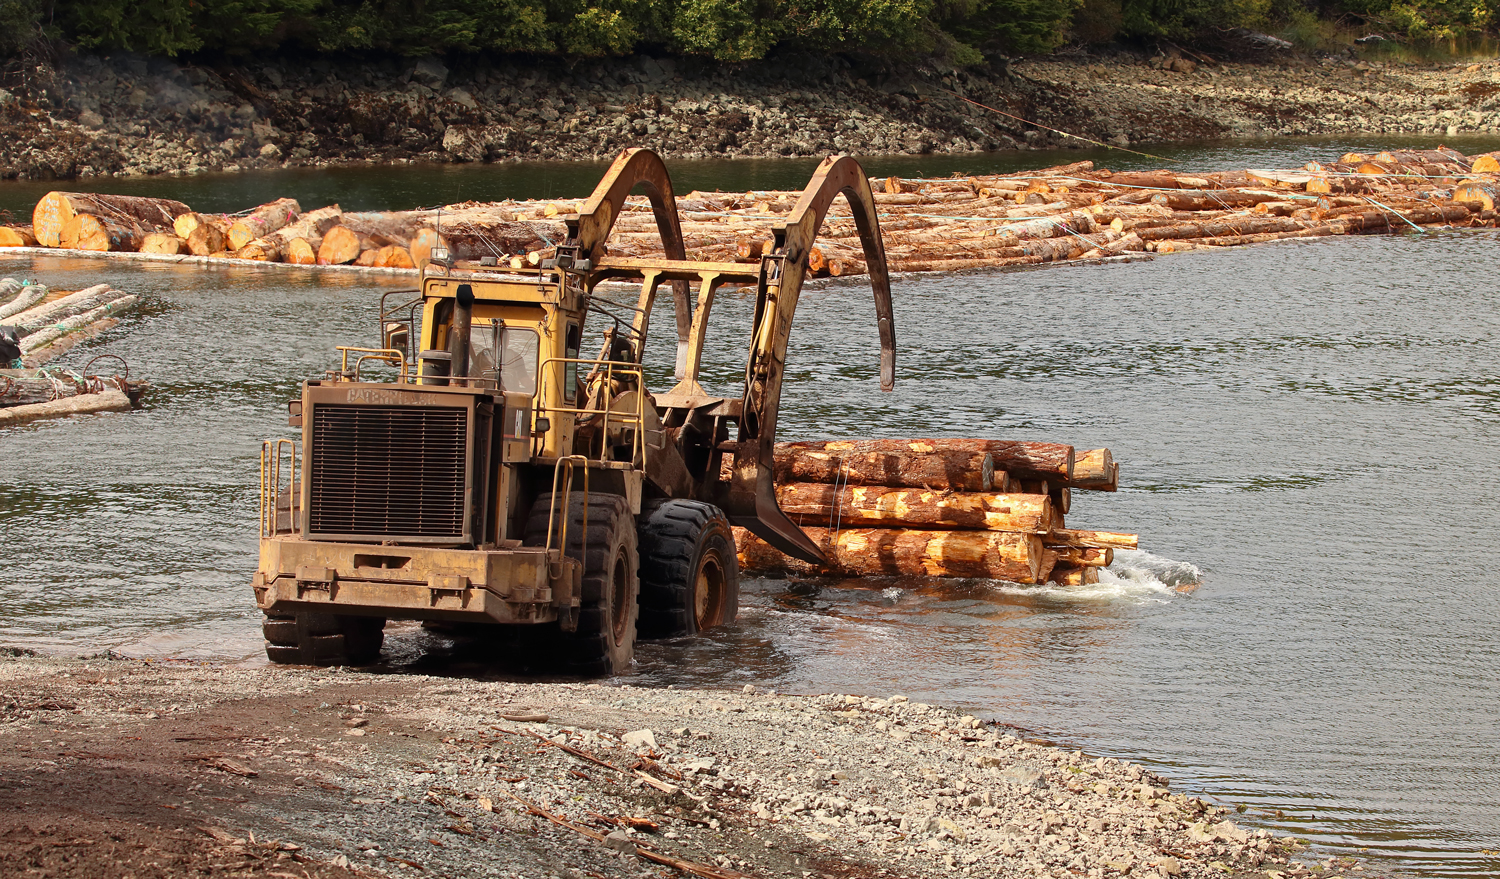 Caterpillar 988F log loader dumping a bundle of logs into the water on Prince of Wales Island in Southeast Alaska